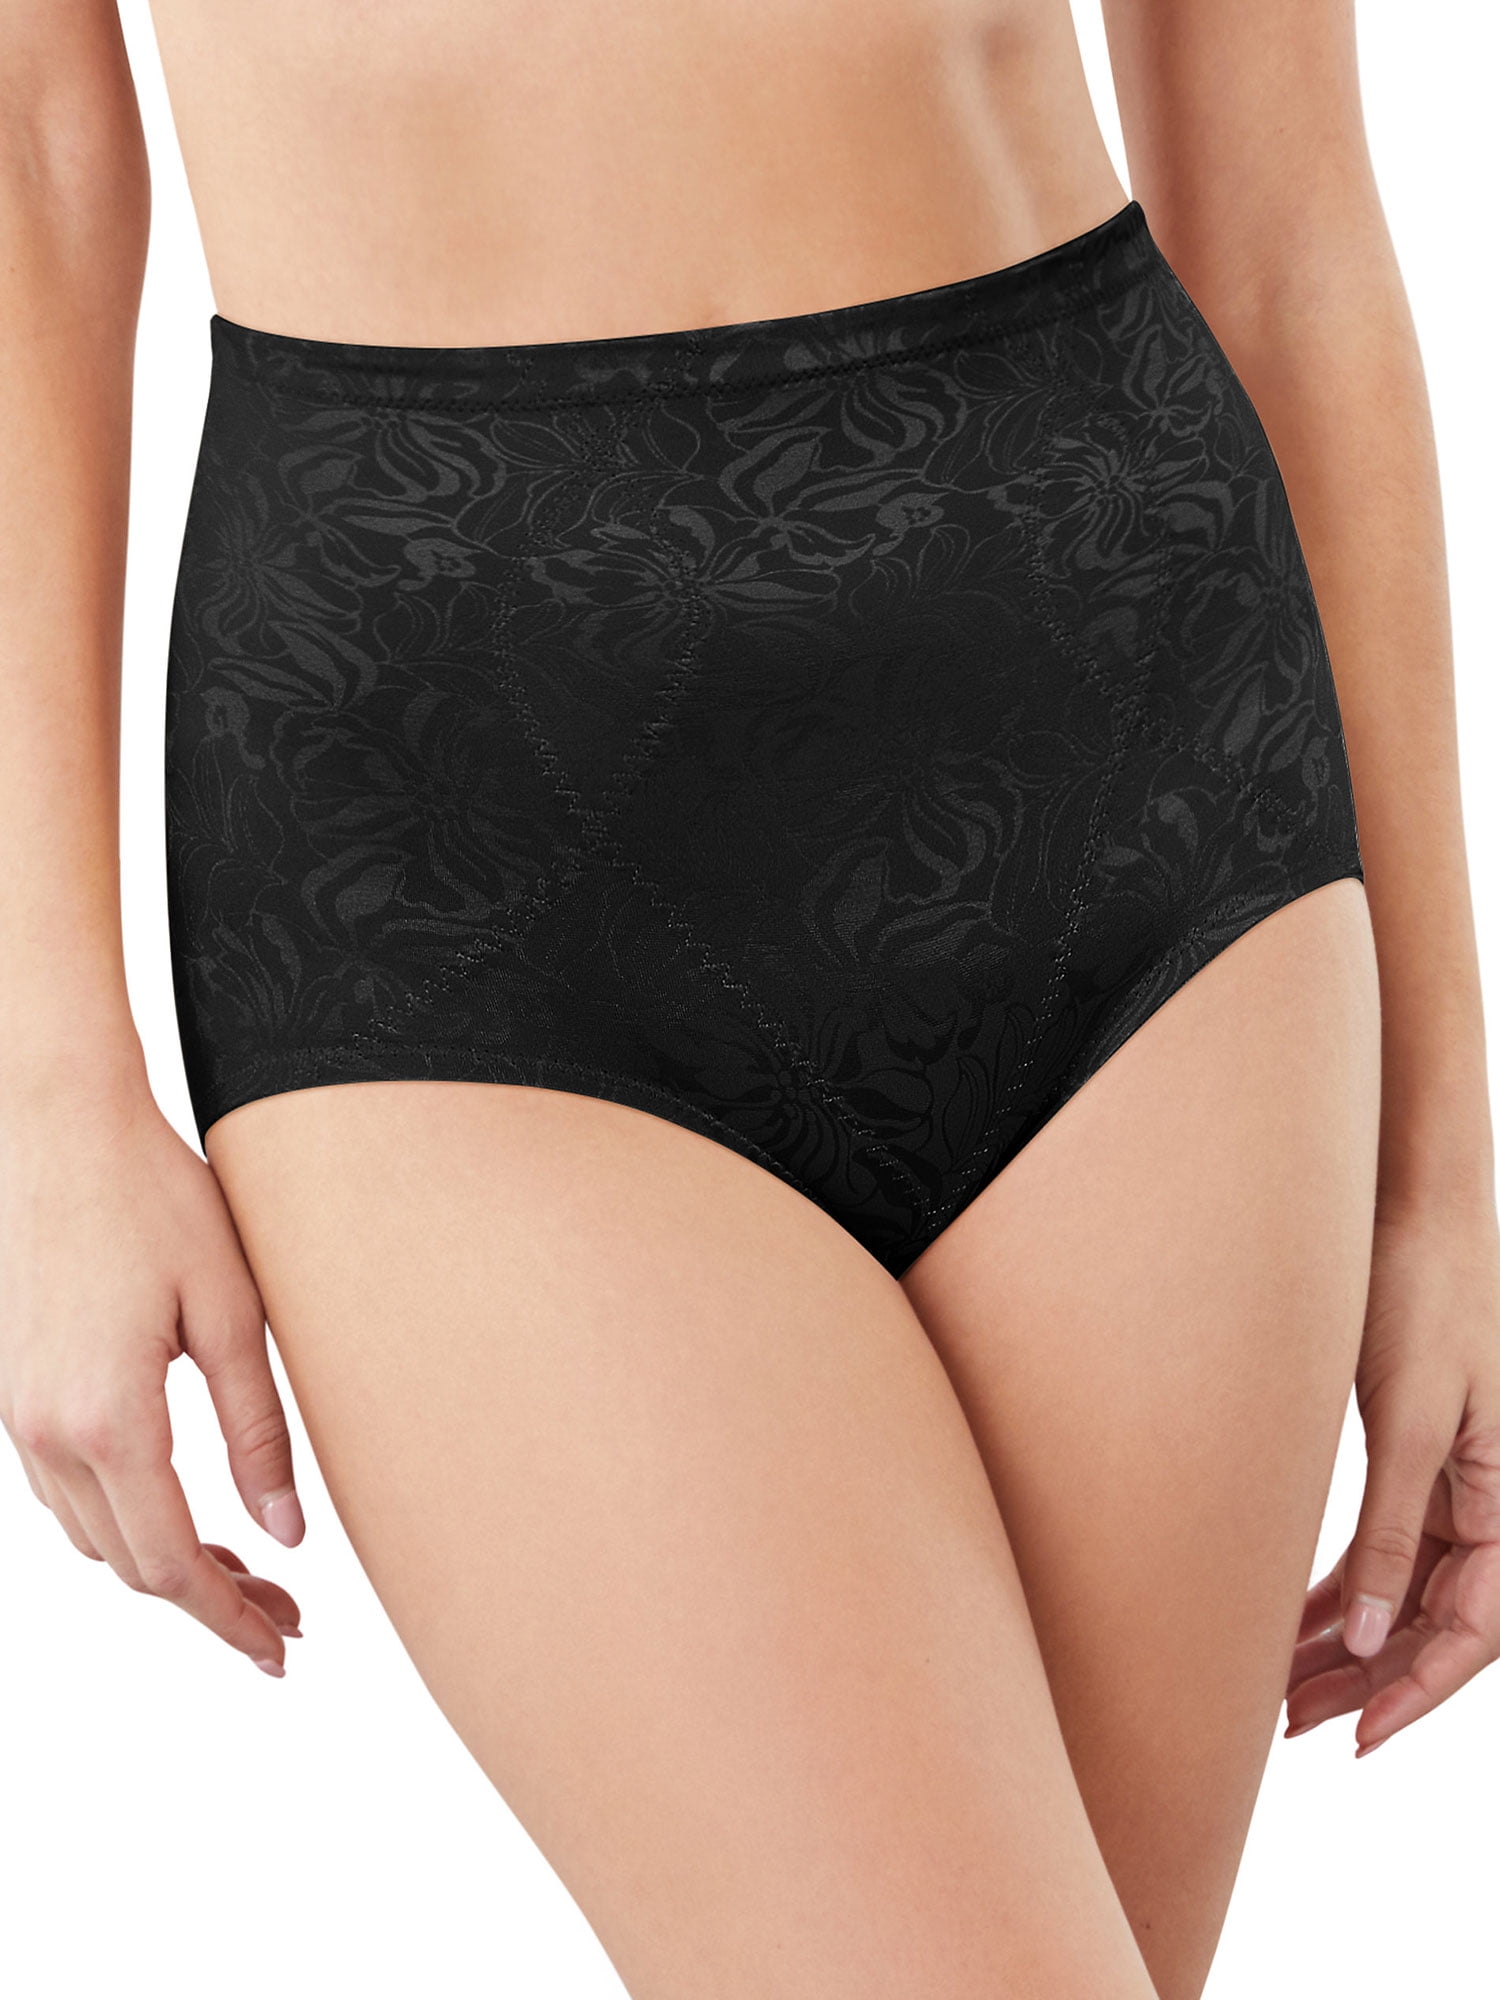 Maidenform High-Waisted Panties for Women